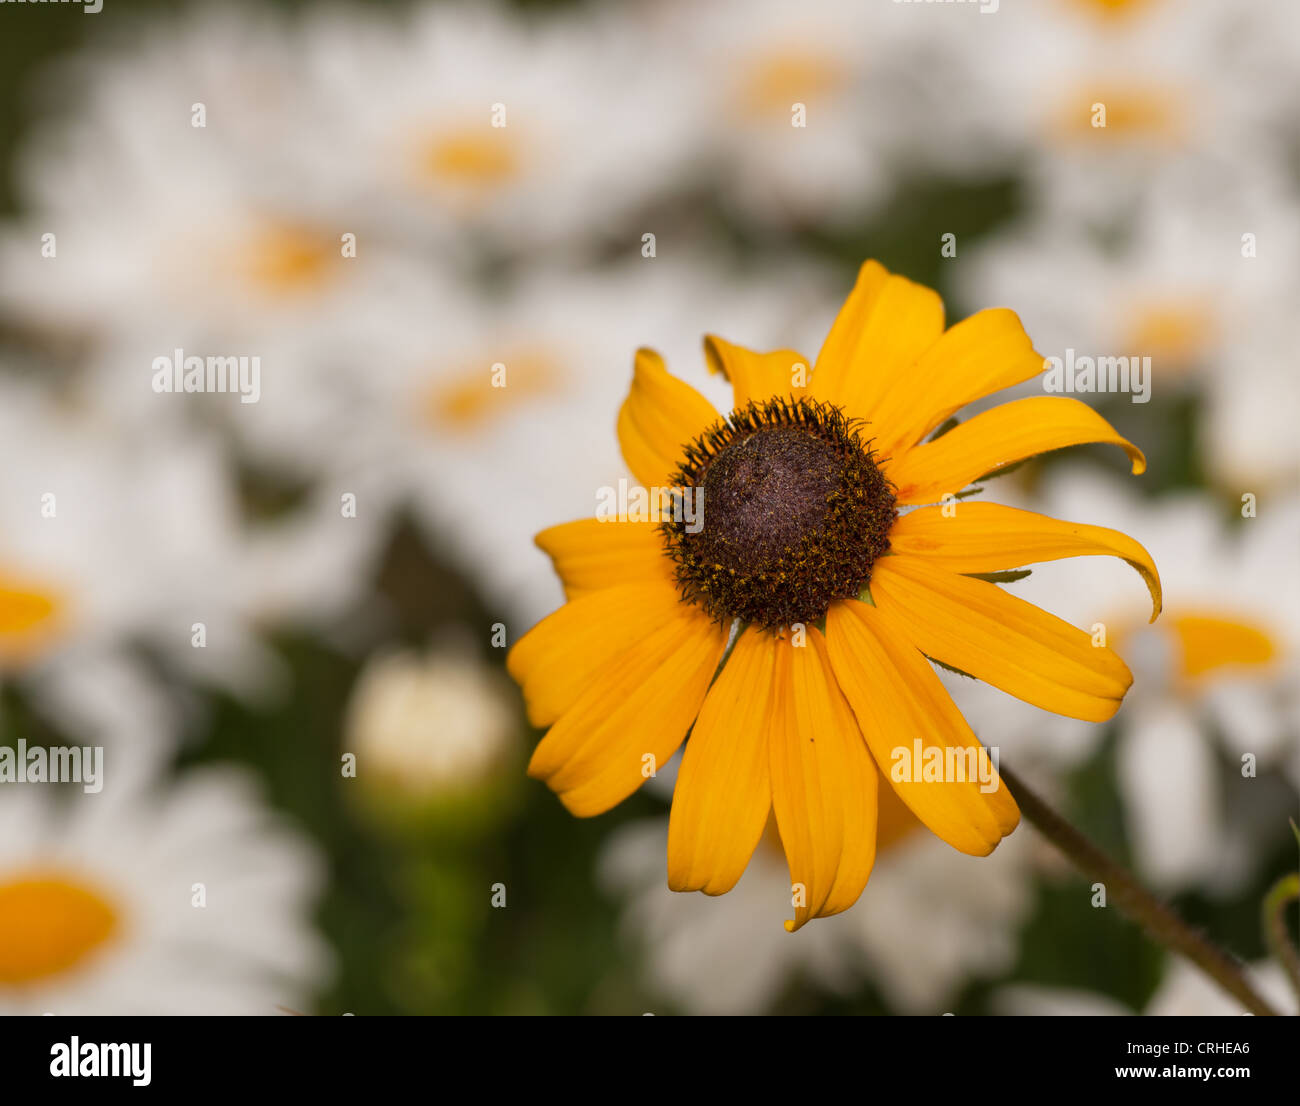 Yellow and brown Black-eyed Susan against a sea of white Daisies Stock Photo